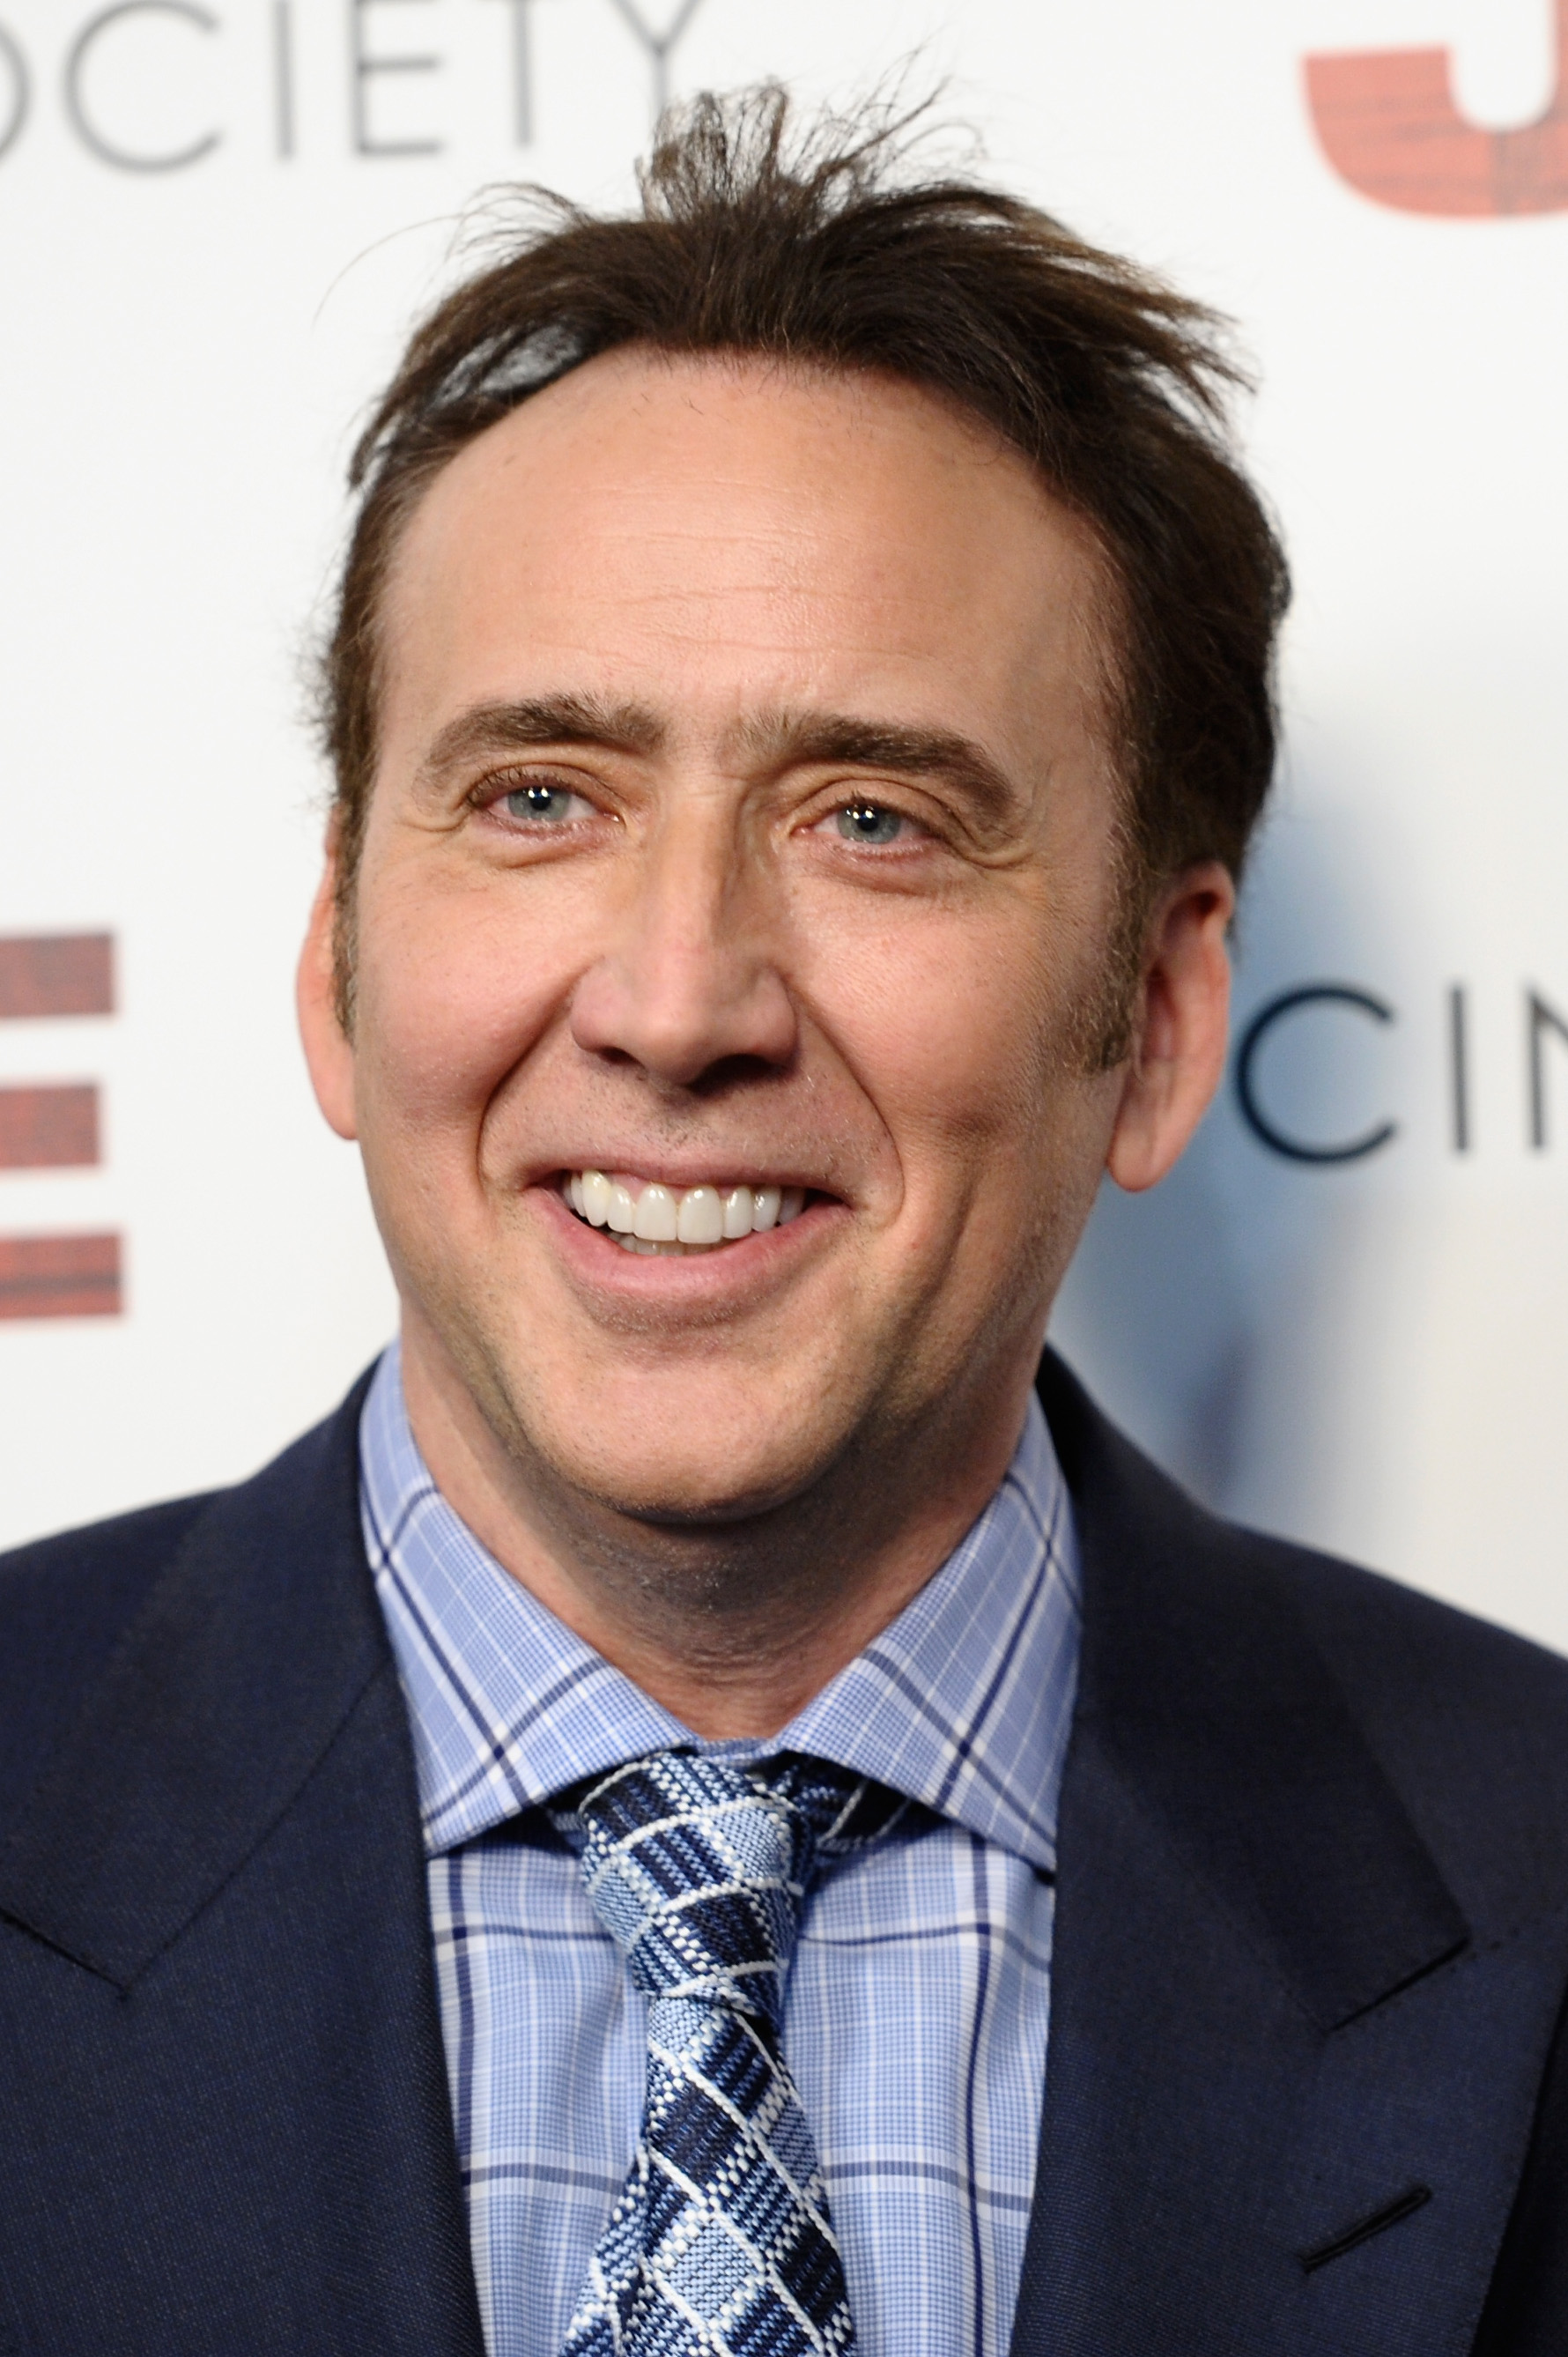 Nicolas Cage attends the a screening of "Joe" April 9, 2014 in New York City. (Ilya S. Savenok--Getty Images)